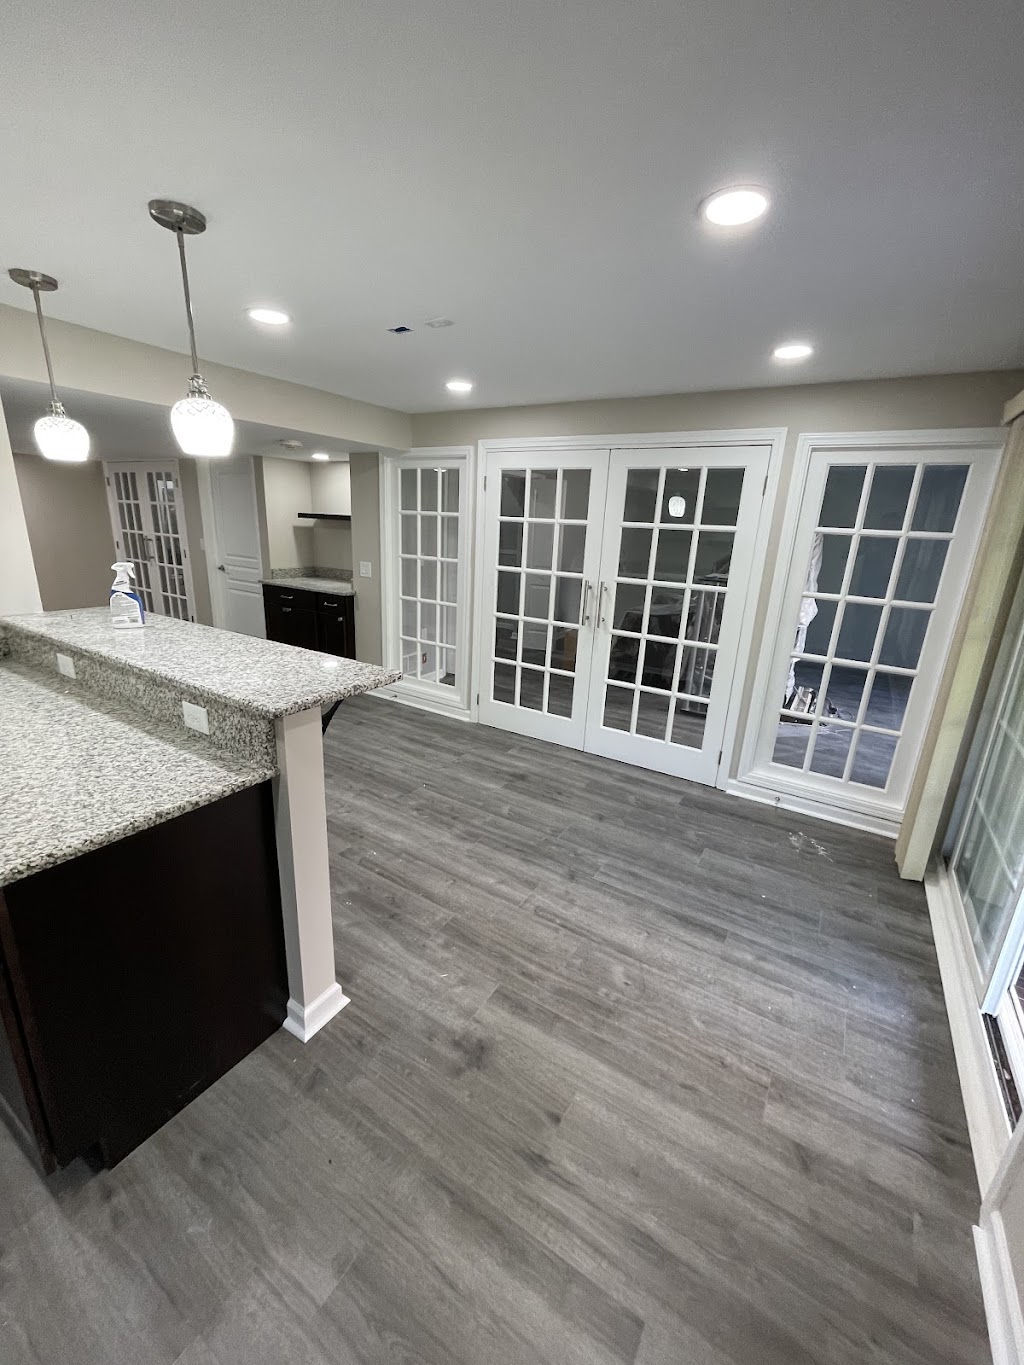 Tersigni & Sons Construction | 12725 Meadow View Cir, Holly, MI 48442 | Phone: (248) 467-2709